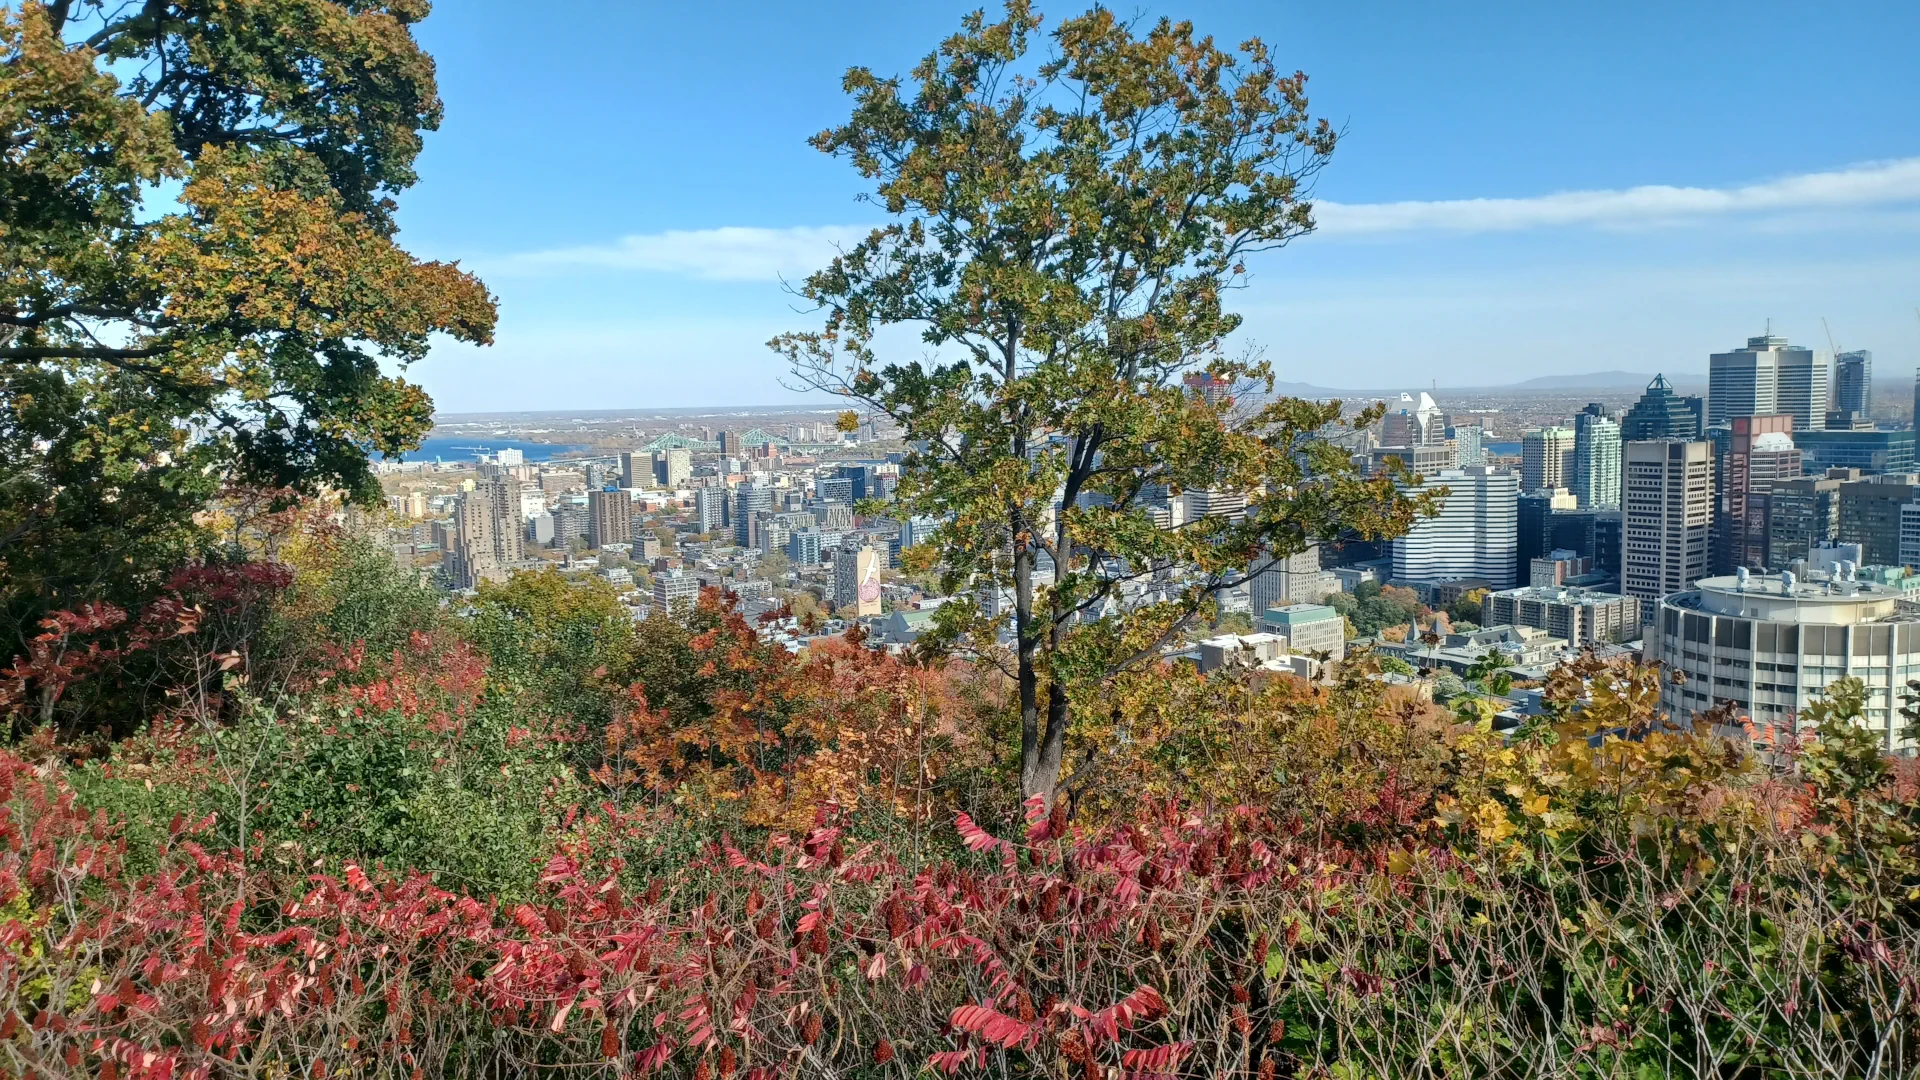 overview of the Montreal skyline in daylight from the Mount Royal Chalet. the Jacques Cartier Bridge is visible on the left